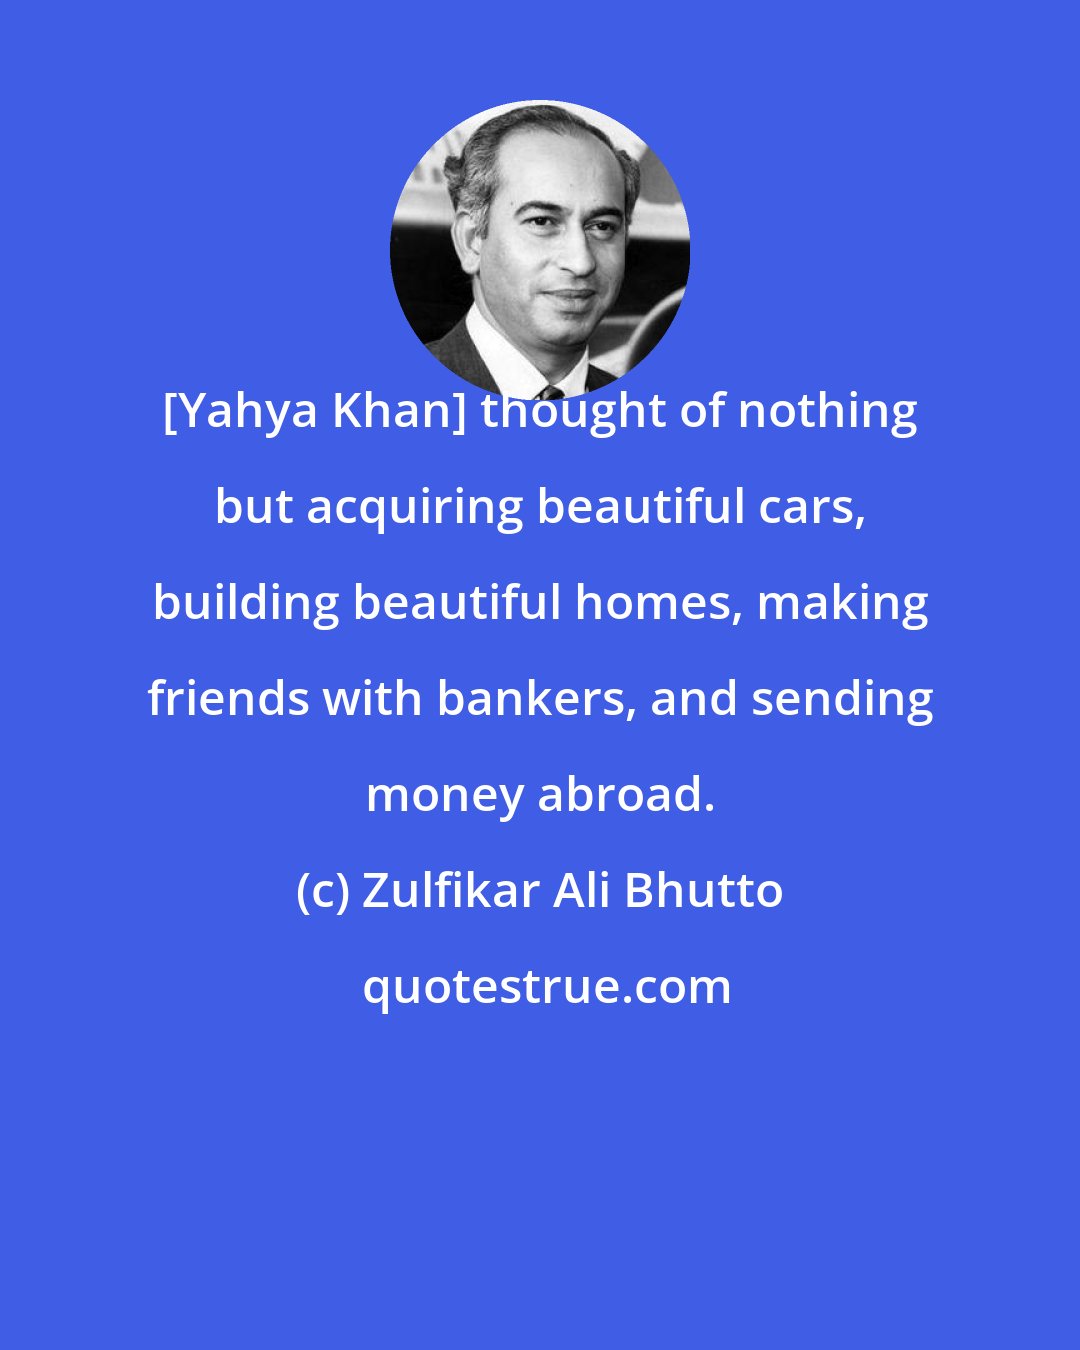 Zulfikar Ali Bhutto: [Yahya Khan] thought of nothing but acquiring beautiful cars, building beautiful homes, making friends with bankers, and sending money abroad.